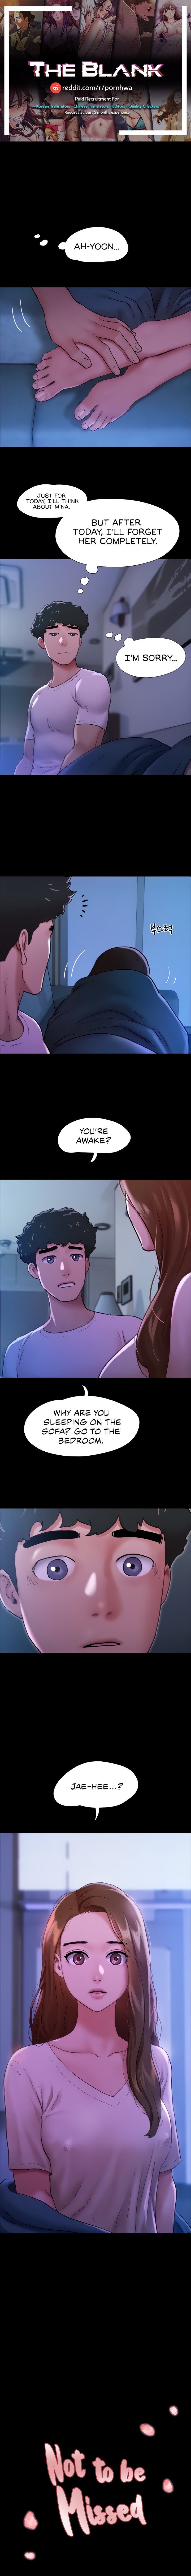 Not to be missed - Chapter 7 Page 1